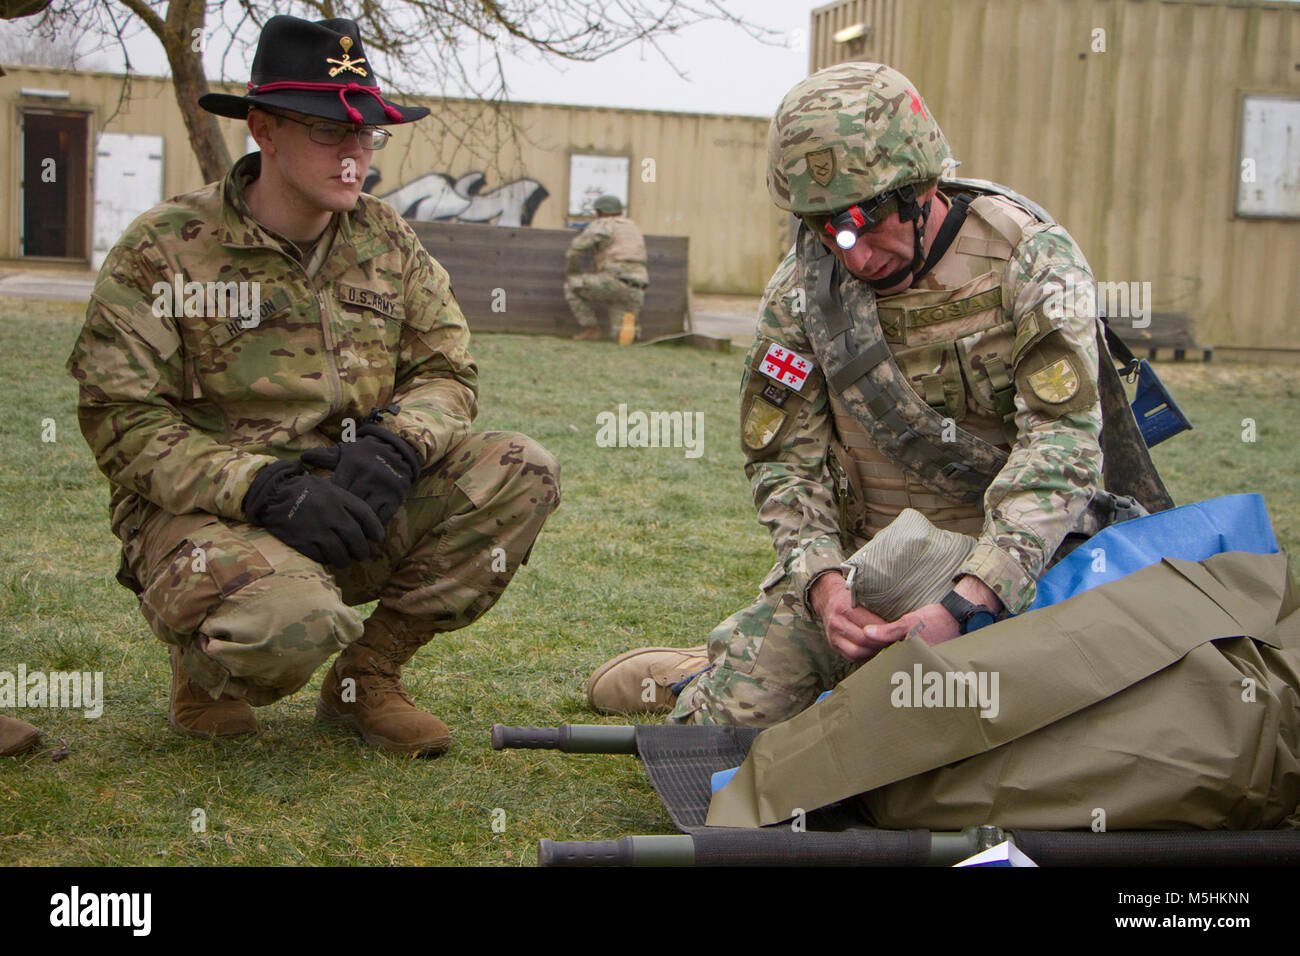 Spc. Wesley Hobson, a combat medic assigned to 4th Squadron, 2d cavalry Regiment, observes a soldier from 11th Light Infantry Battalion, 1st Infantry Brigade, Georgian Land Forces, place a bandage on a simulated casualty   during a Combat Life Saver course Feb. 9, 2018 at the Medical Simulation Training Center in Grafenwoehr Training Area, Germany. The Georgian soldiers are training with U.S. Marine Corpsmen for an upcoming deployment to Afghanistan. The soldiers instructing the course are from 2nd Cavalry Regiment and 7th Army Training Command.  ( Stock Photo